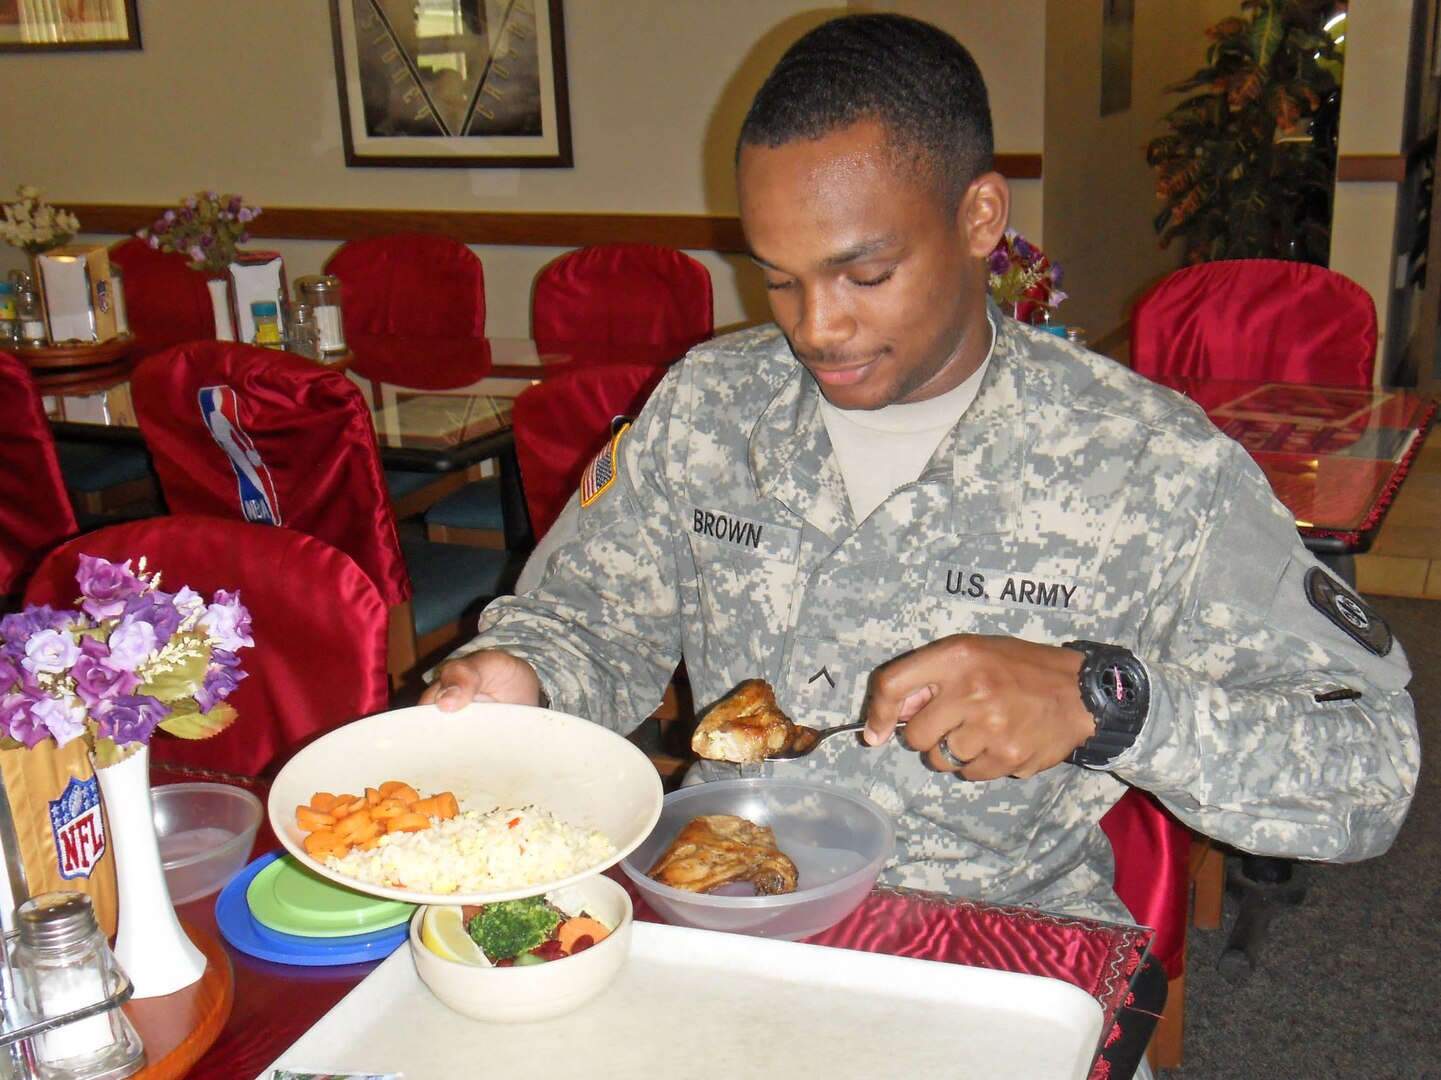 Army Pvt. Byron Brown, assigned to 520th Maintenance Company, 194th Combat Sustainment Support Battalion, eats at a dining facility at Camp Humphreys, South Korea. Despite South Korea’s ban on poultry items from the U.S., warfighters who eat at DFACs across the peninsula continue to eat fresh chicken, thanks to DLA Troop Support Pacific.